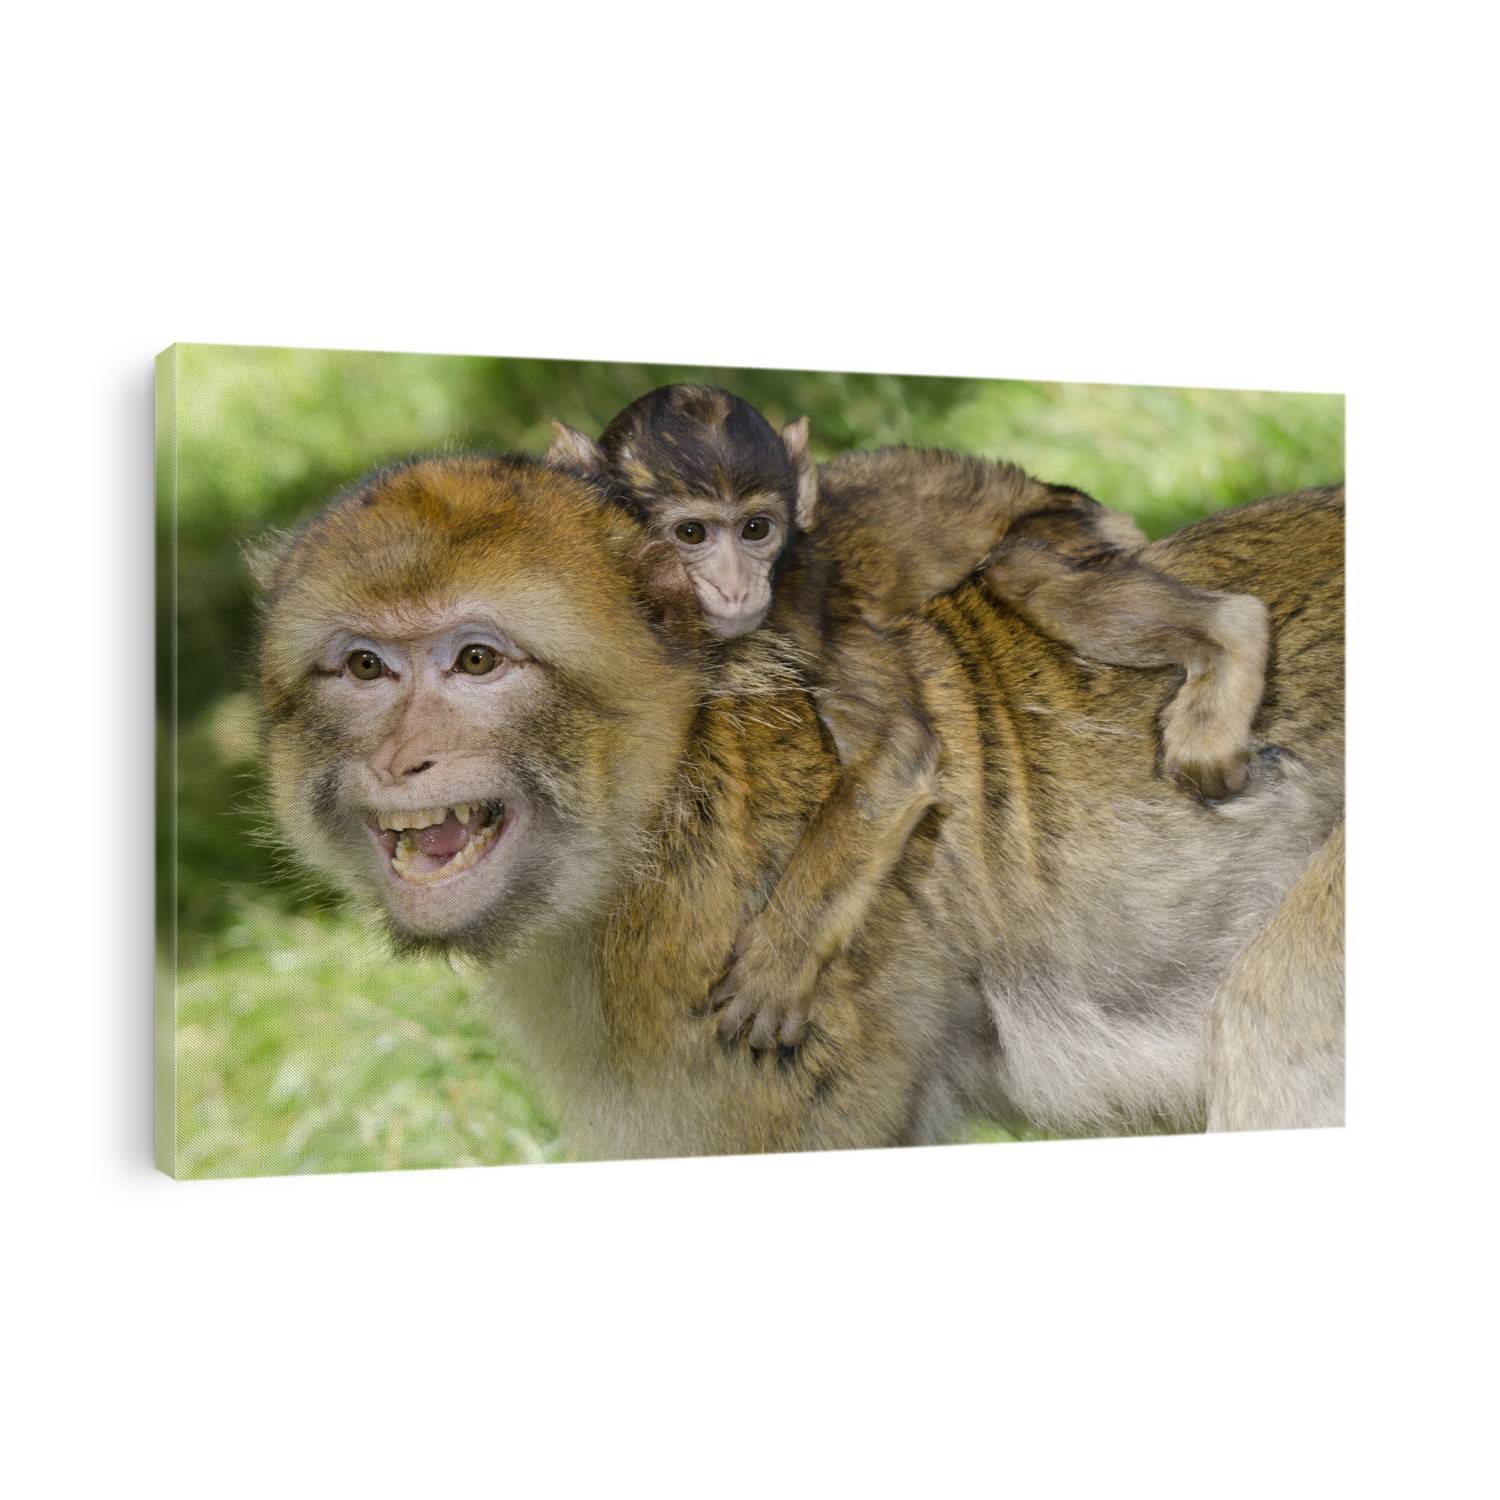 An adult Barbary macaque (Macaca sylvanus) with a baby on its back and baring its teeth at the Trentham Monkey Forest, Staffordshire, UK.